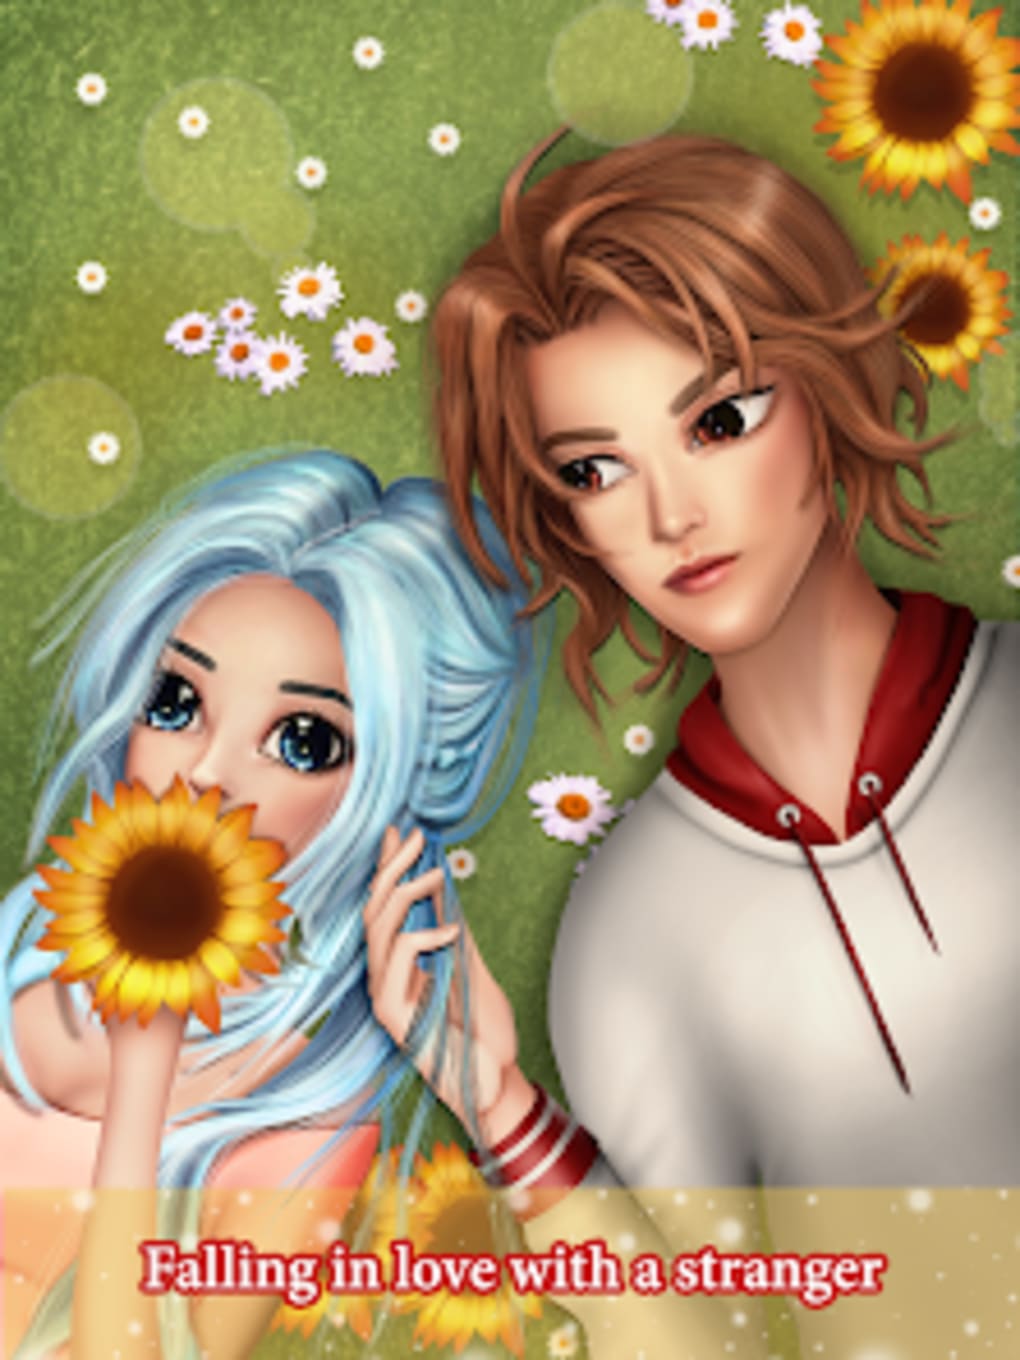 12 Best Offline Anime Love Story Games for Android  iOS  Free apps for  Android and iOS